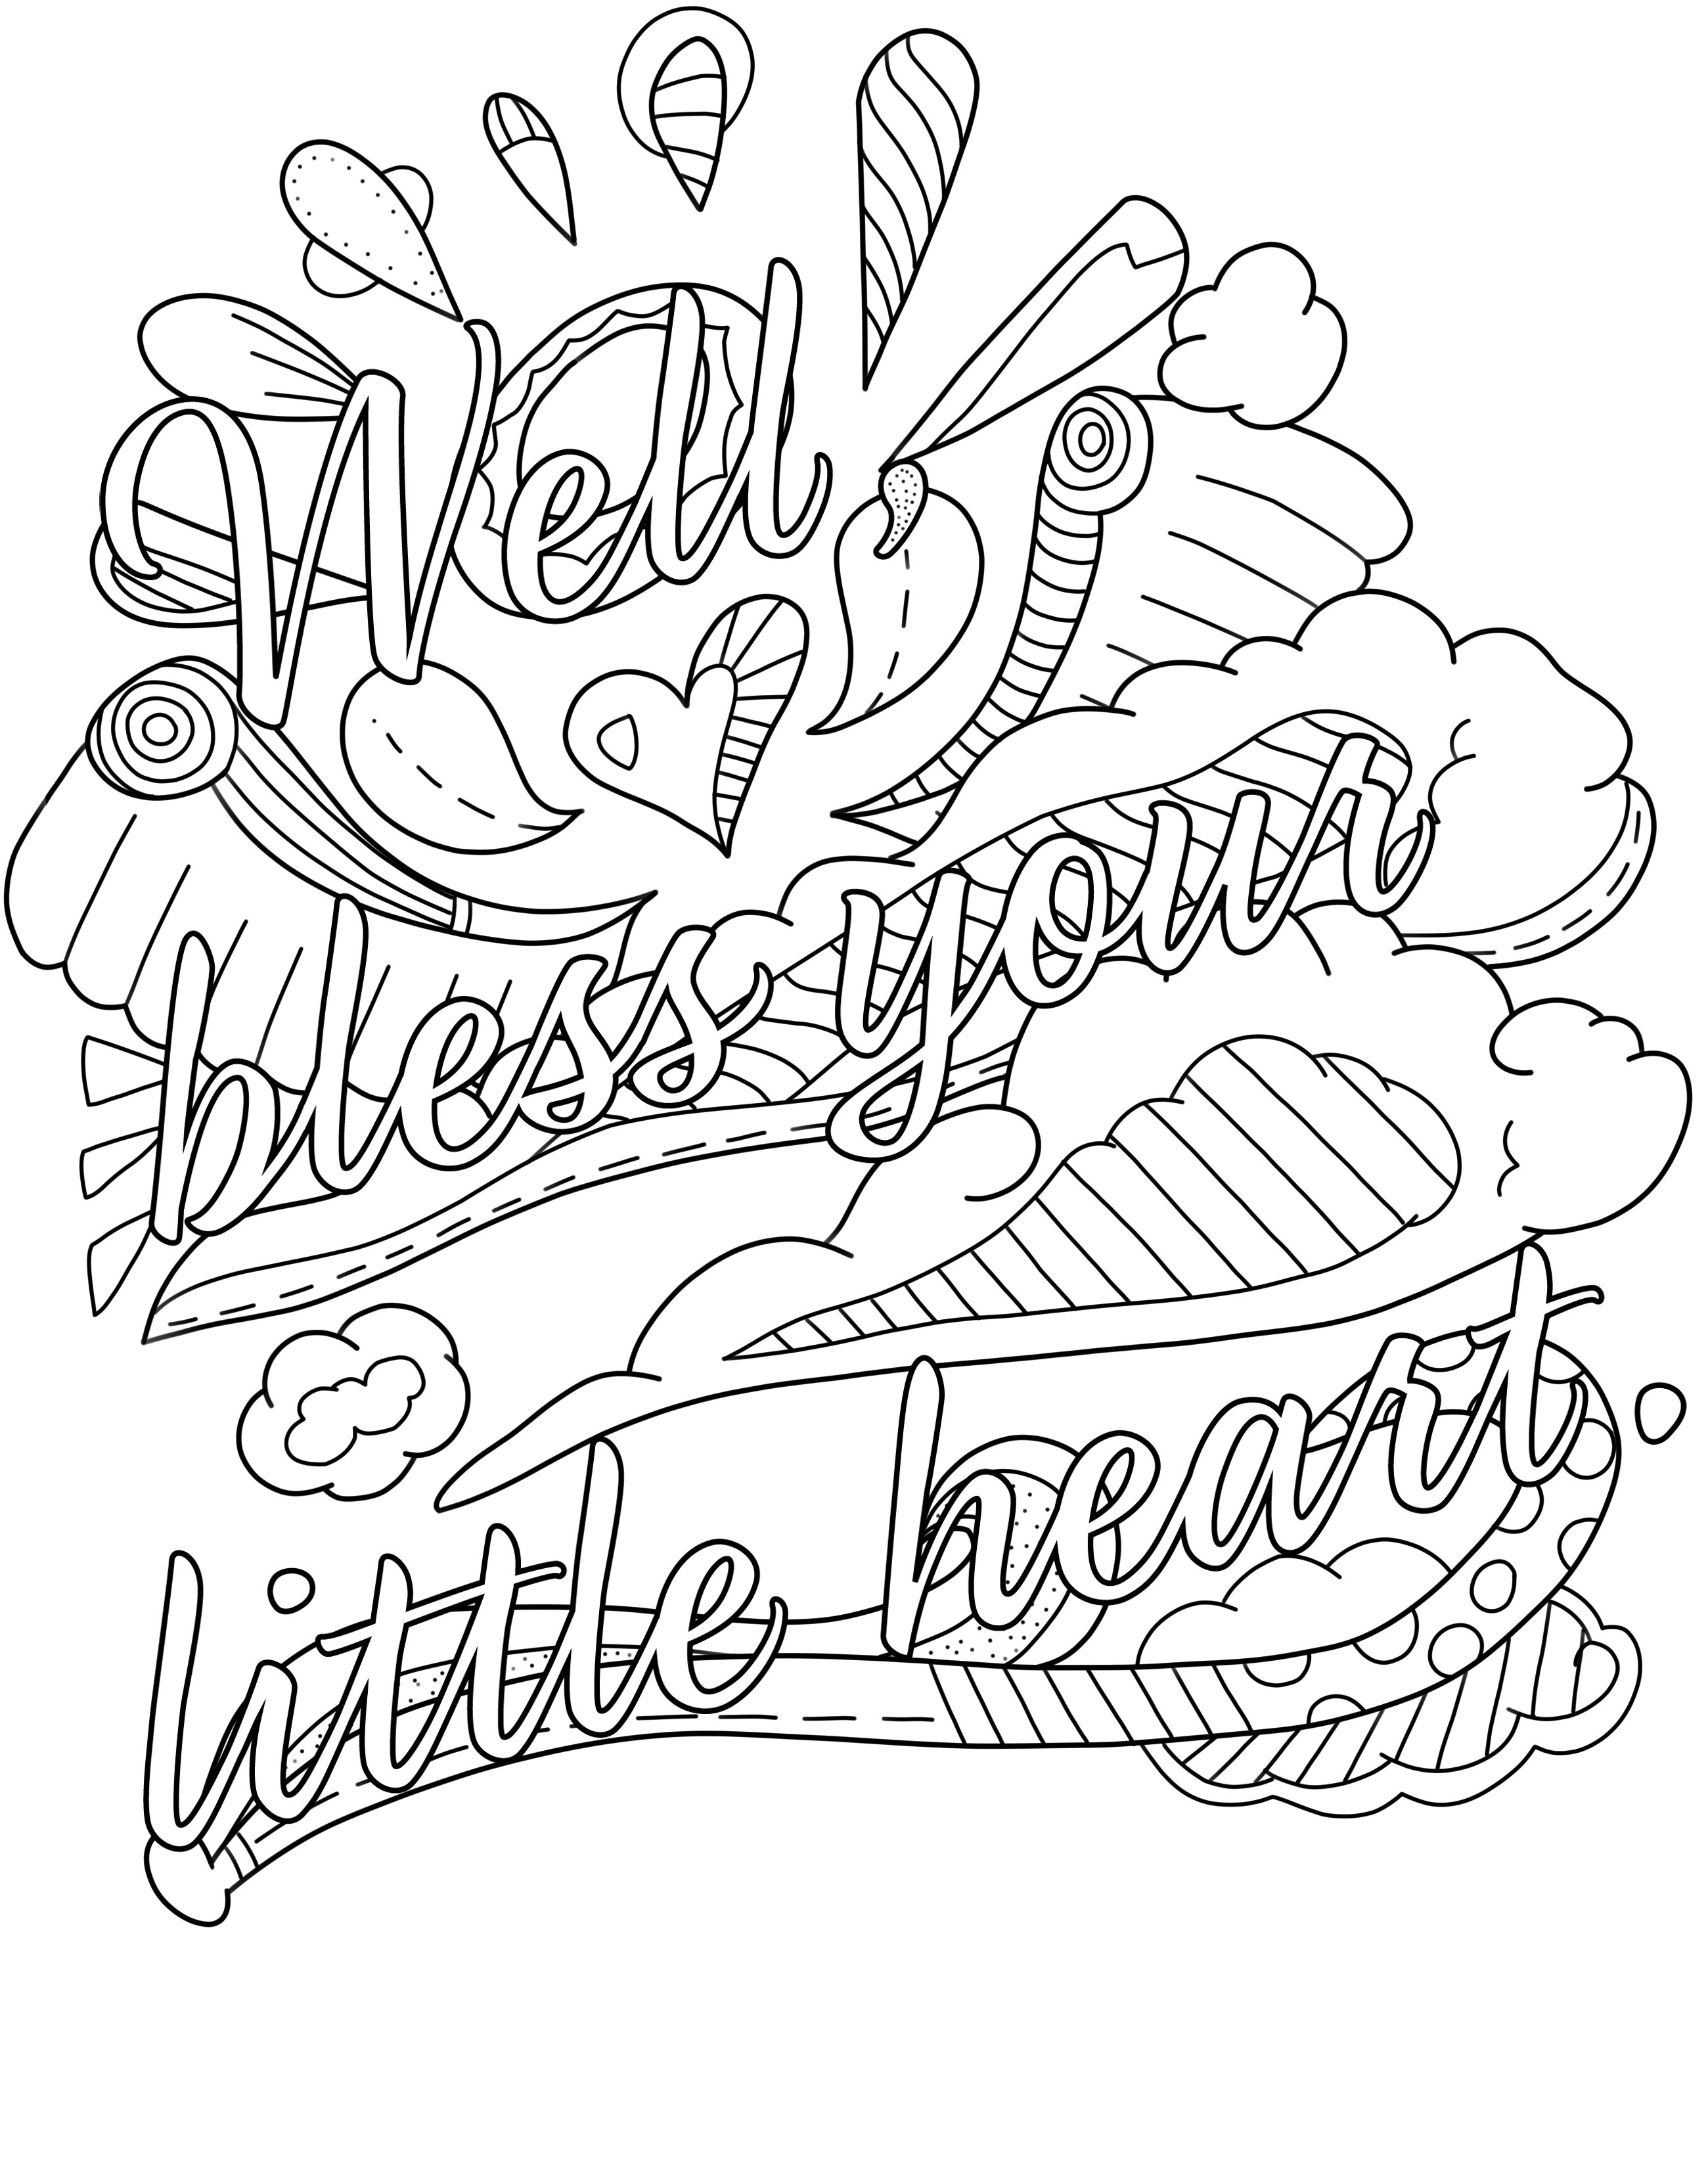 Coloring Pages : Well Bless Your Little Heart Free Swear Word - Swear Word Coloring Pages Printable Free